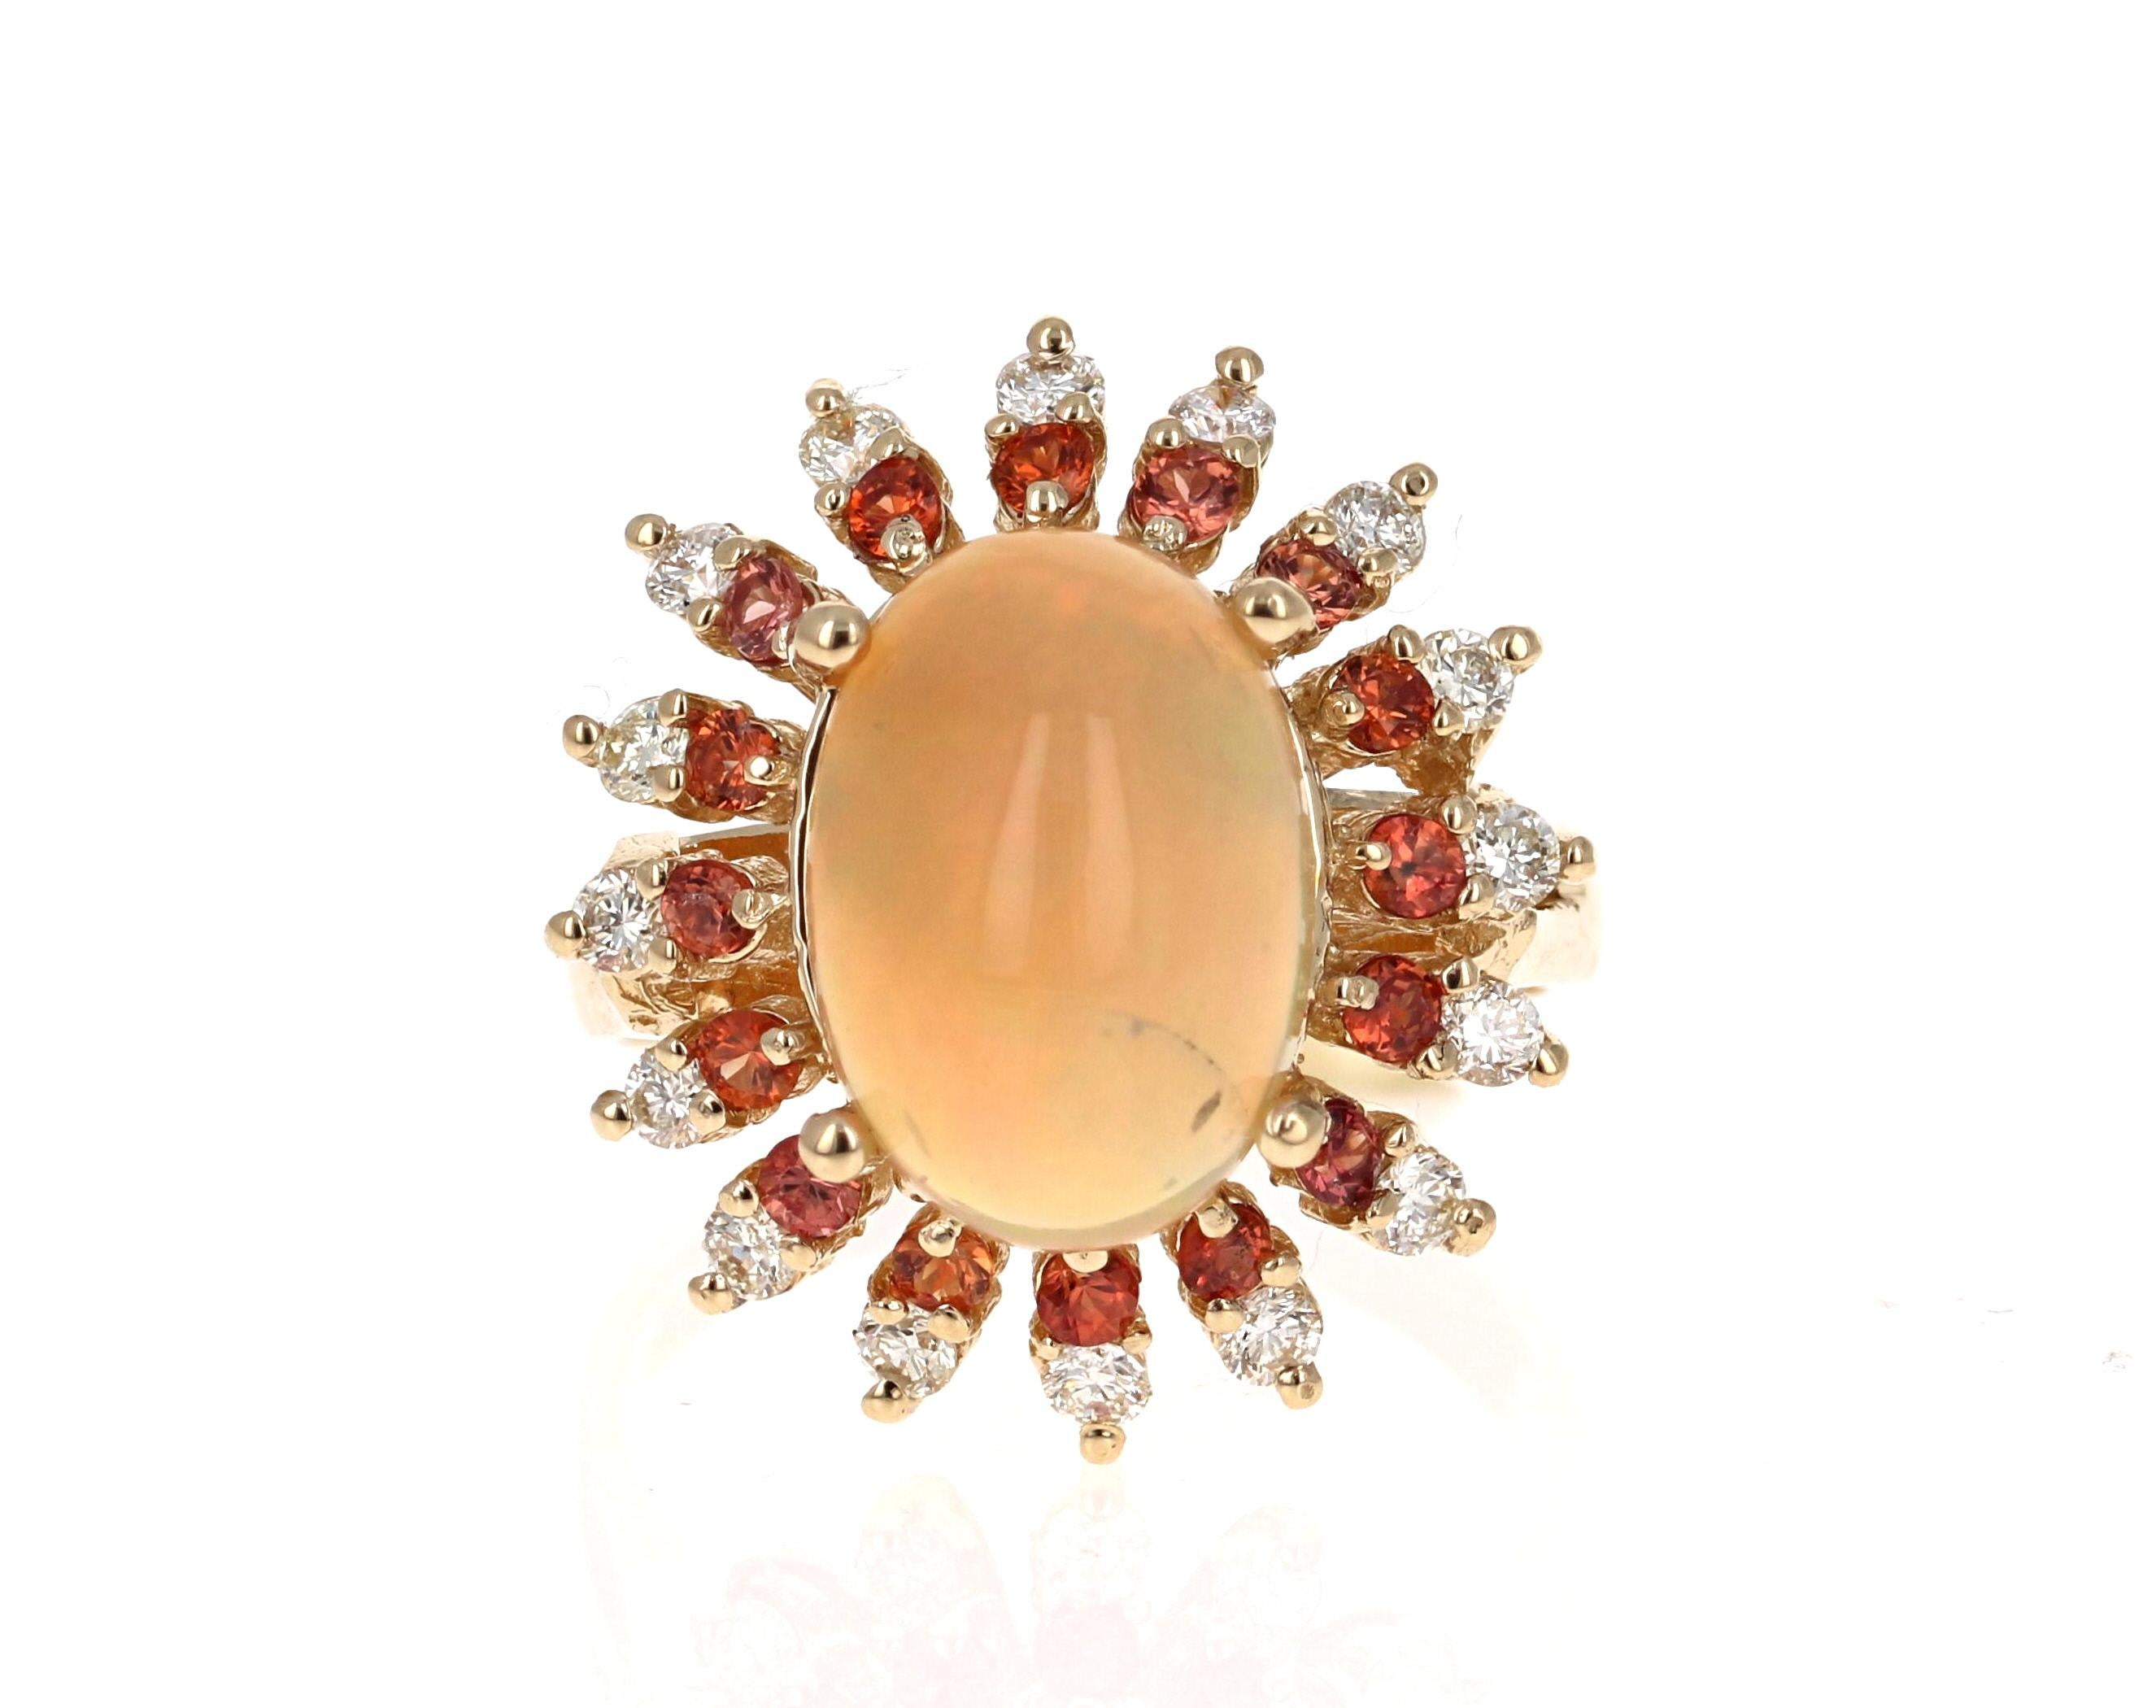 Stunning and uniquely designed 6.63 Carat Oval Cut Opal and Diamond Yellow Gold Ring with Orange Sapphire accents!

The Oval Cut Opal in the center of the ring weighs 2.68 Carats.  It is surrounded by 16 Round Cut Orange Sapphires that weigh 0.53